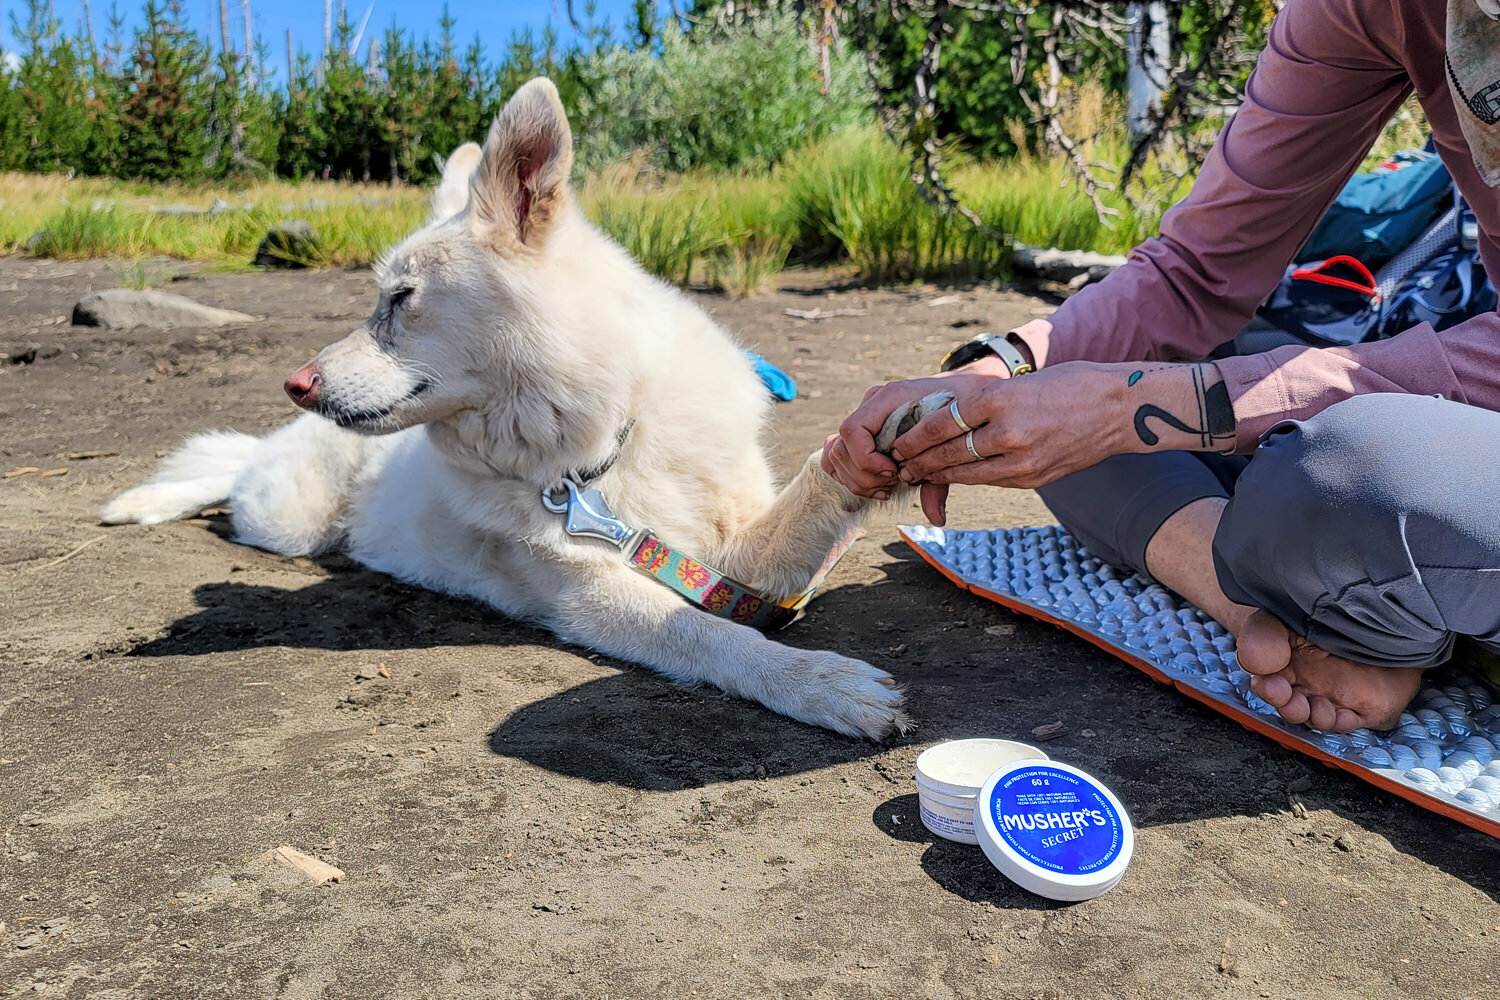 Musher’s Secret Wax PROTECTS YOUR DOG'S PAWS FROM SAND, SNOW, & HOT SURFACES